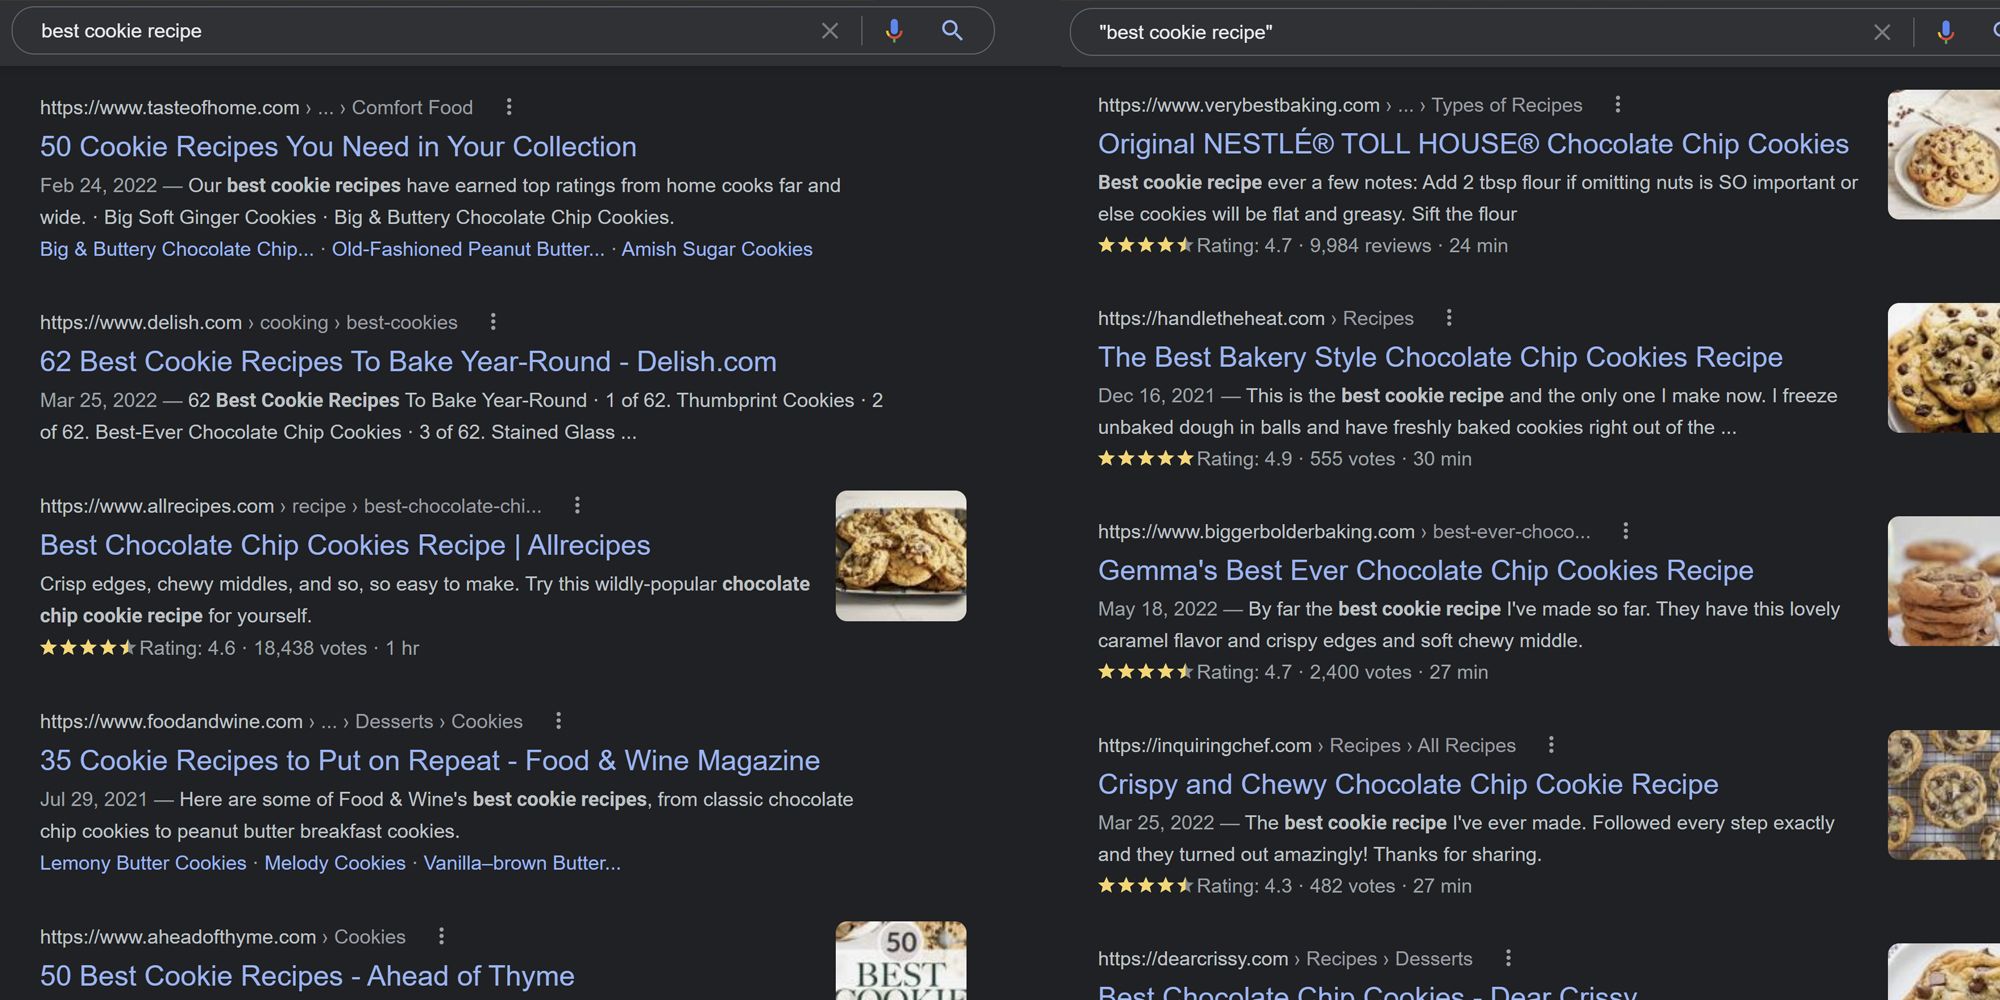 Google Search best cookie recipe quote marks